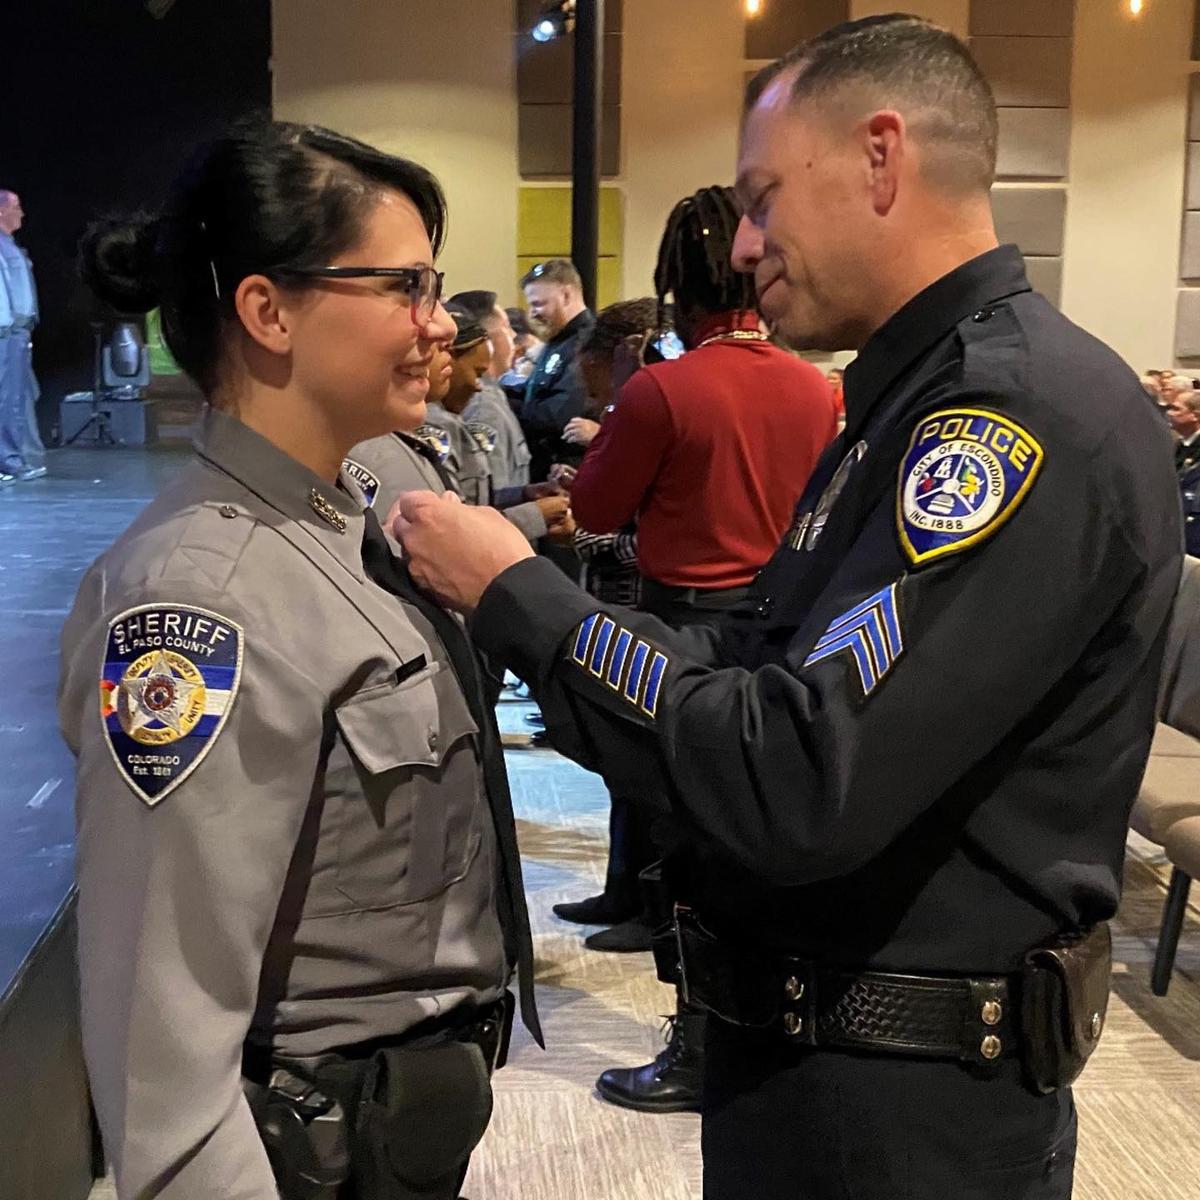 Sgt. Jeff Valdivia pins a badge on Dep. Natalie Young's shirt during her graduation from the El Paso County Sheriff’s Academy, 22 years after saving her life. (Courtesy of <a href="http://www.epcounty.com/sheriff/">El Paso County Sheriff’s Office</a>)